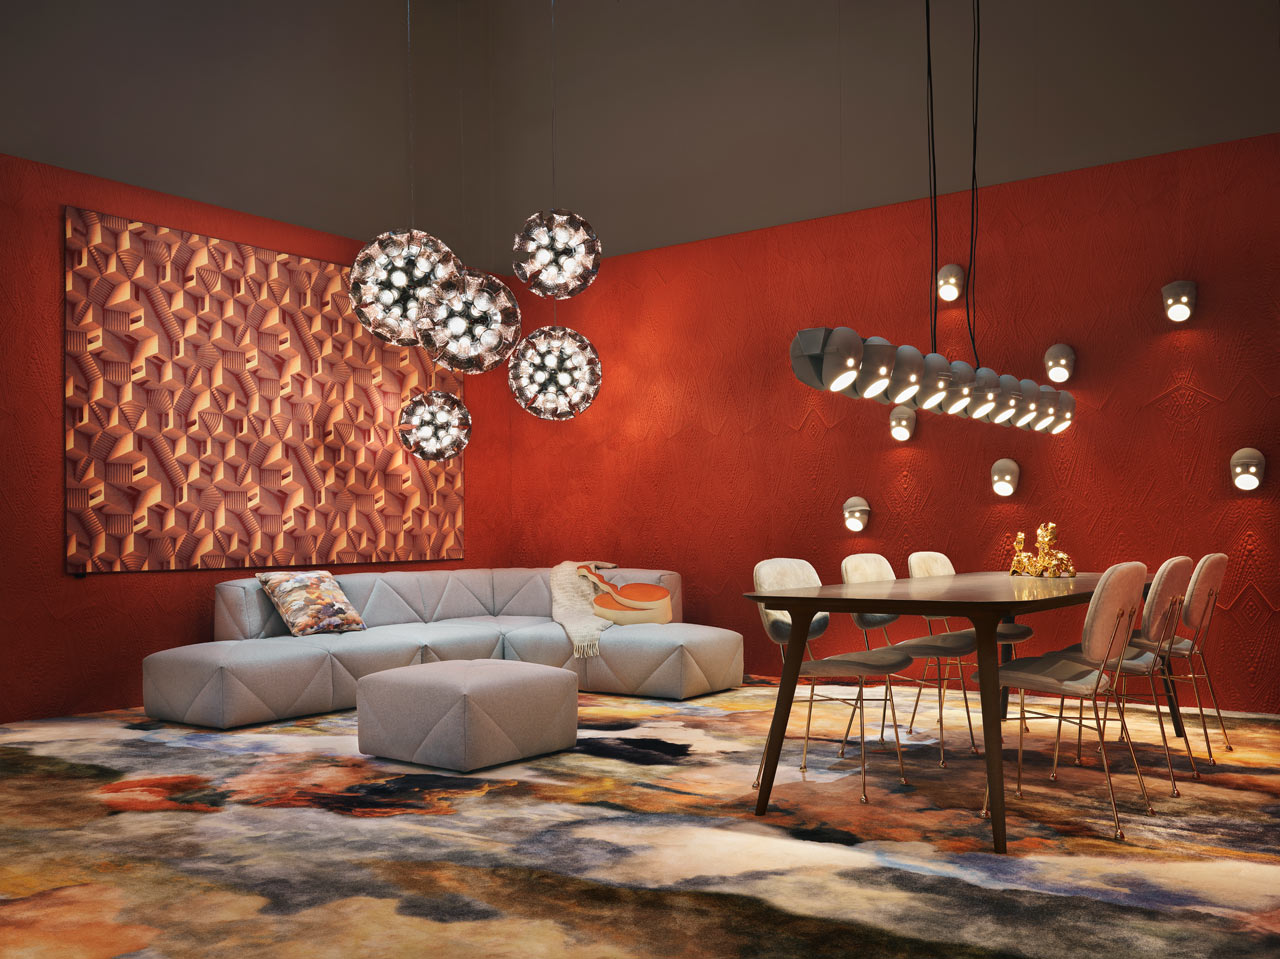 Moooi's A Life Extraordinary Showcased New Designs at Salone